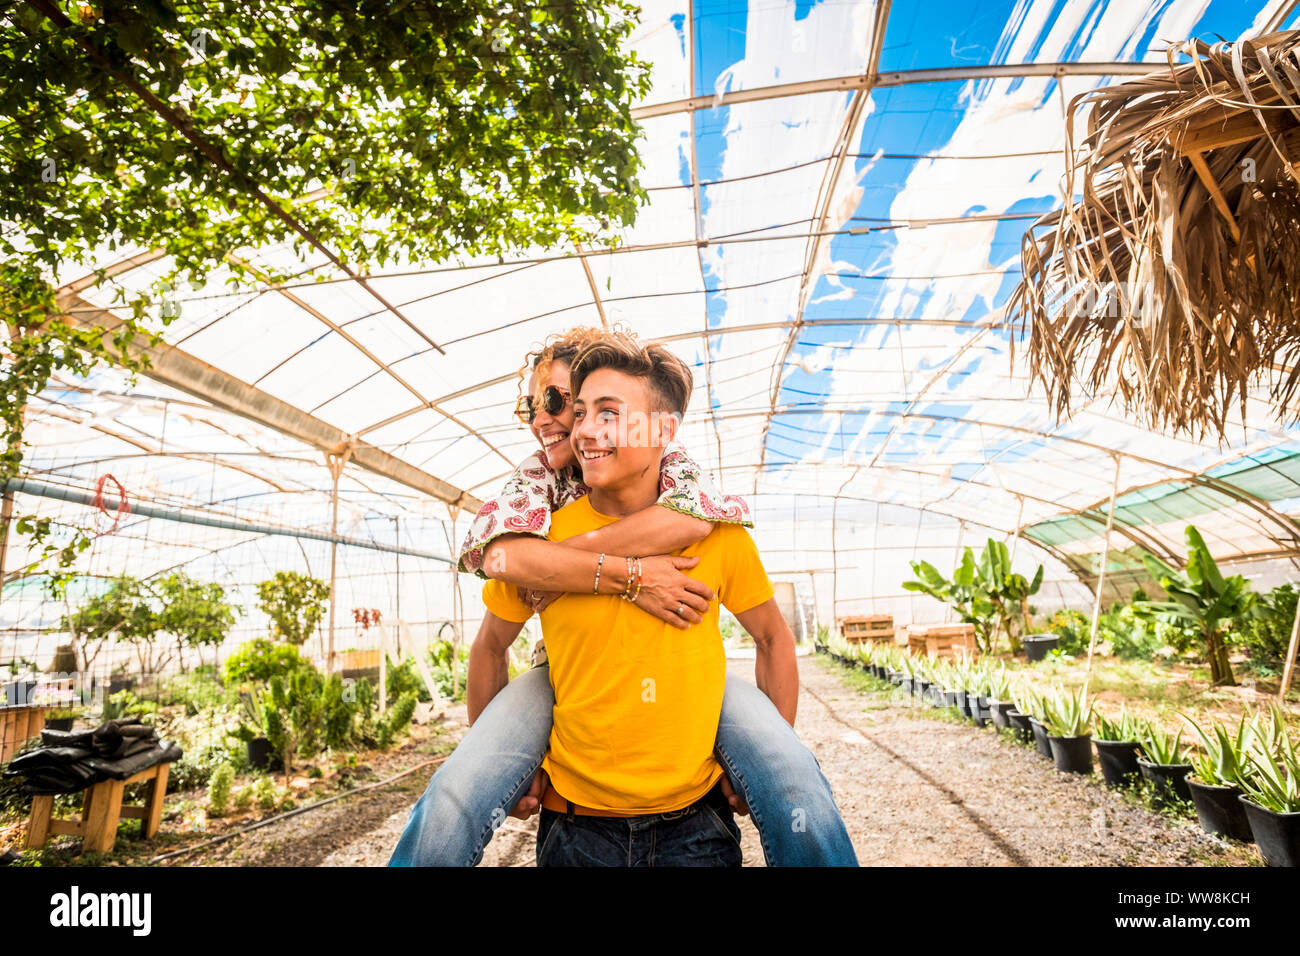 young beautiful teenager play with his mother middle age pretty woman carrying her to his back. couple mother son having fun together like a perfect family in outdoor leisure activity. happy people concept Stock Photo